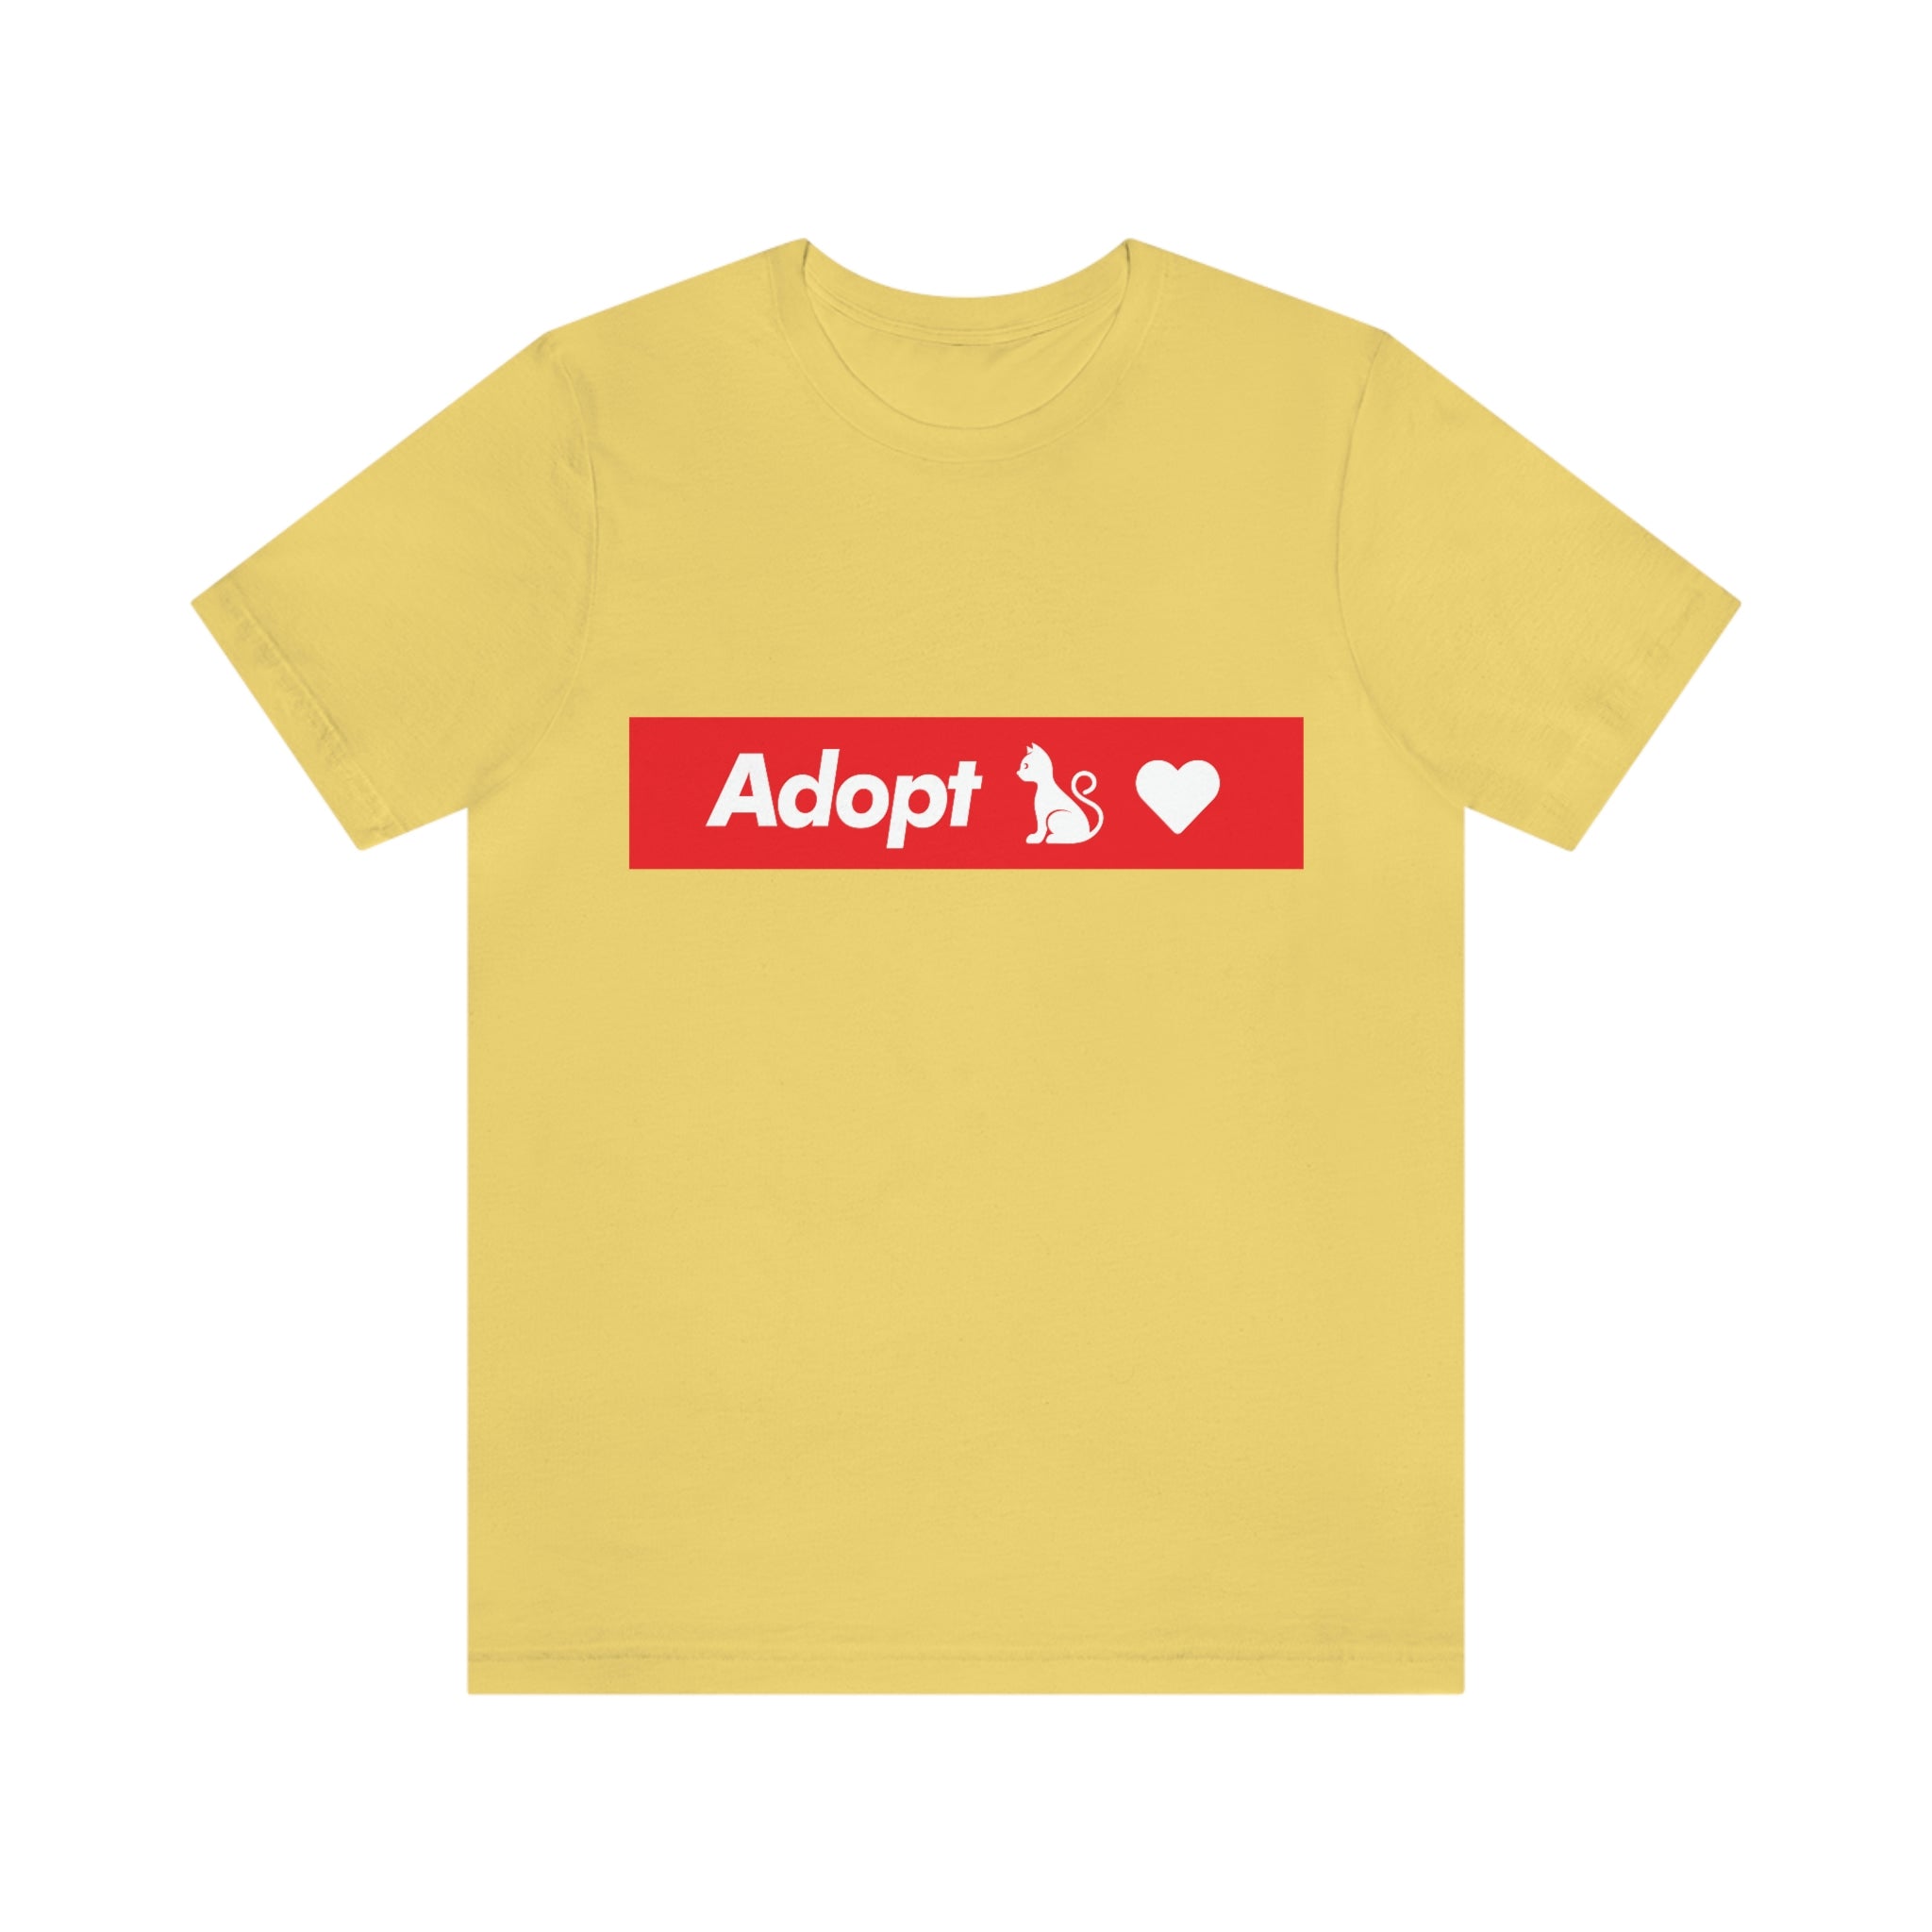 Adopt Love Rescue Cat RED BANNER : Unisex 100% Comfy Cotton T-Shirt Supporting Humane Animal Shelters